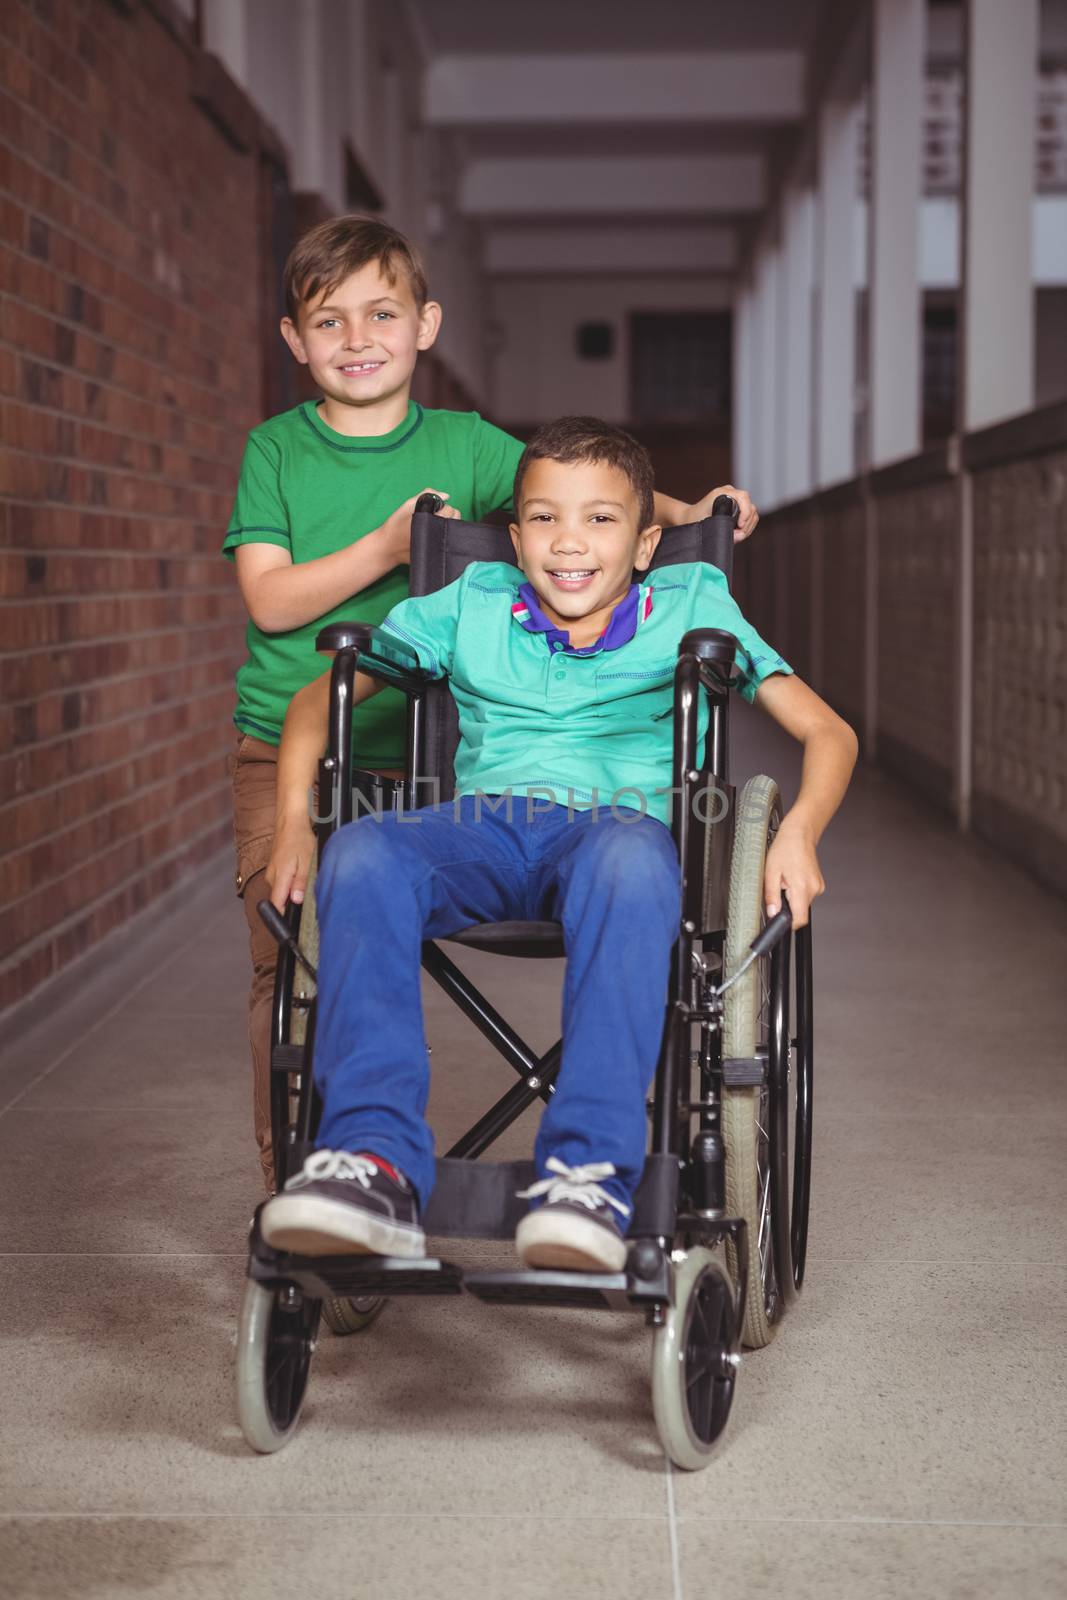 Smiling student in a wheelchair and friend beside him on the elementary school grounds